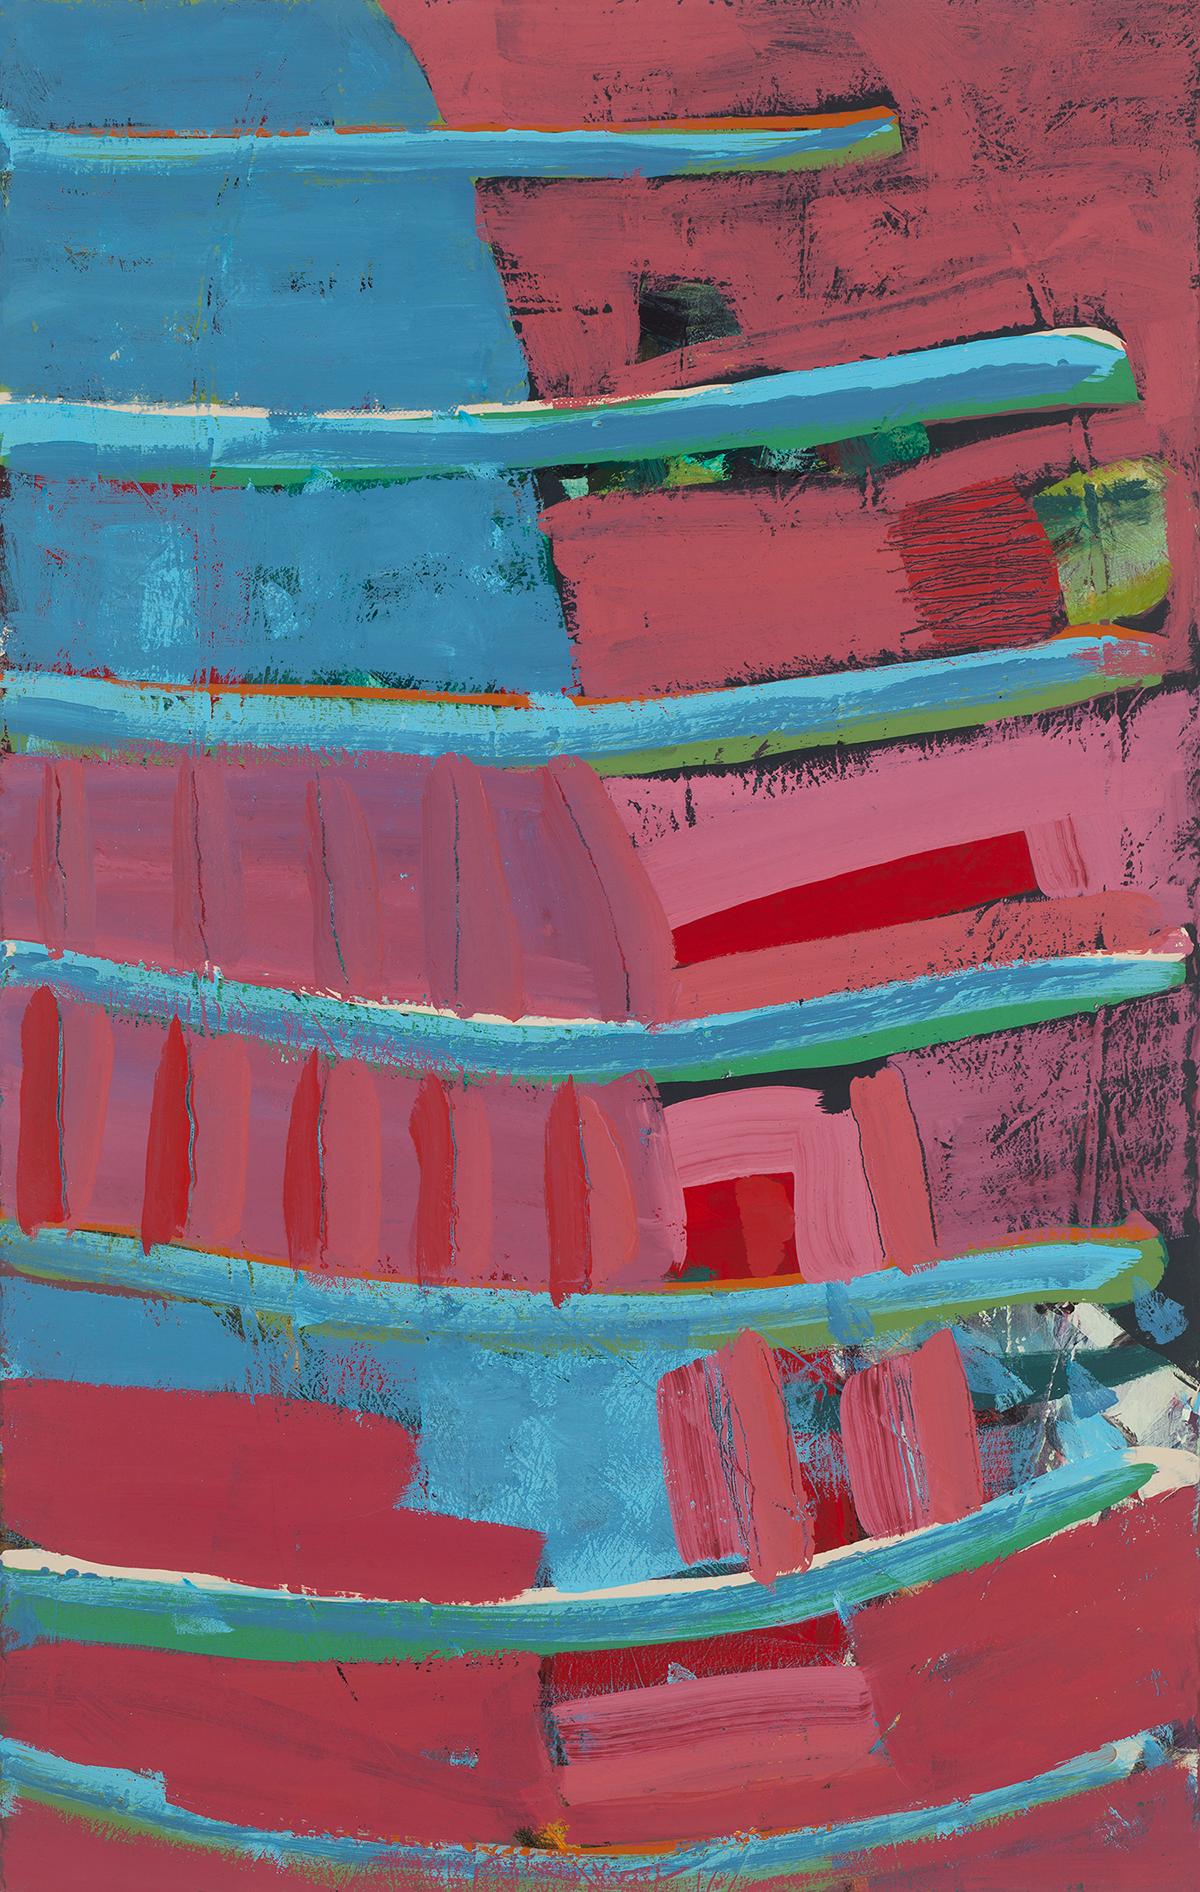 "Easements", abstract, blues, reds, textured, acrylic painting - Painting by Melissa Shaak